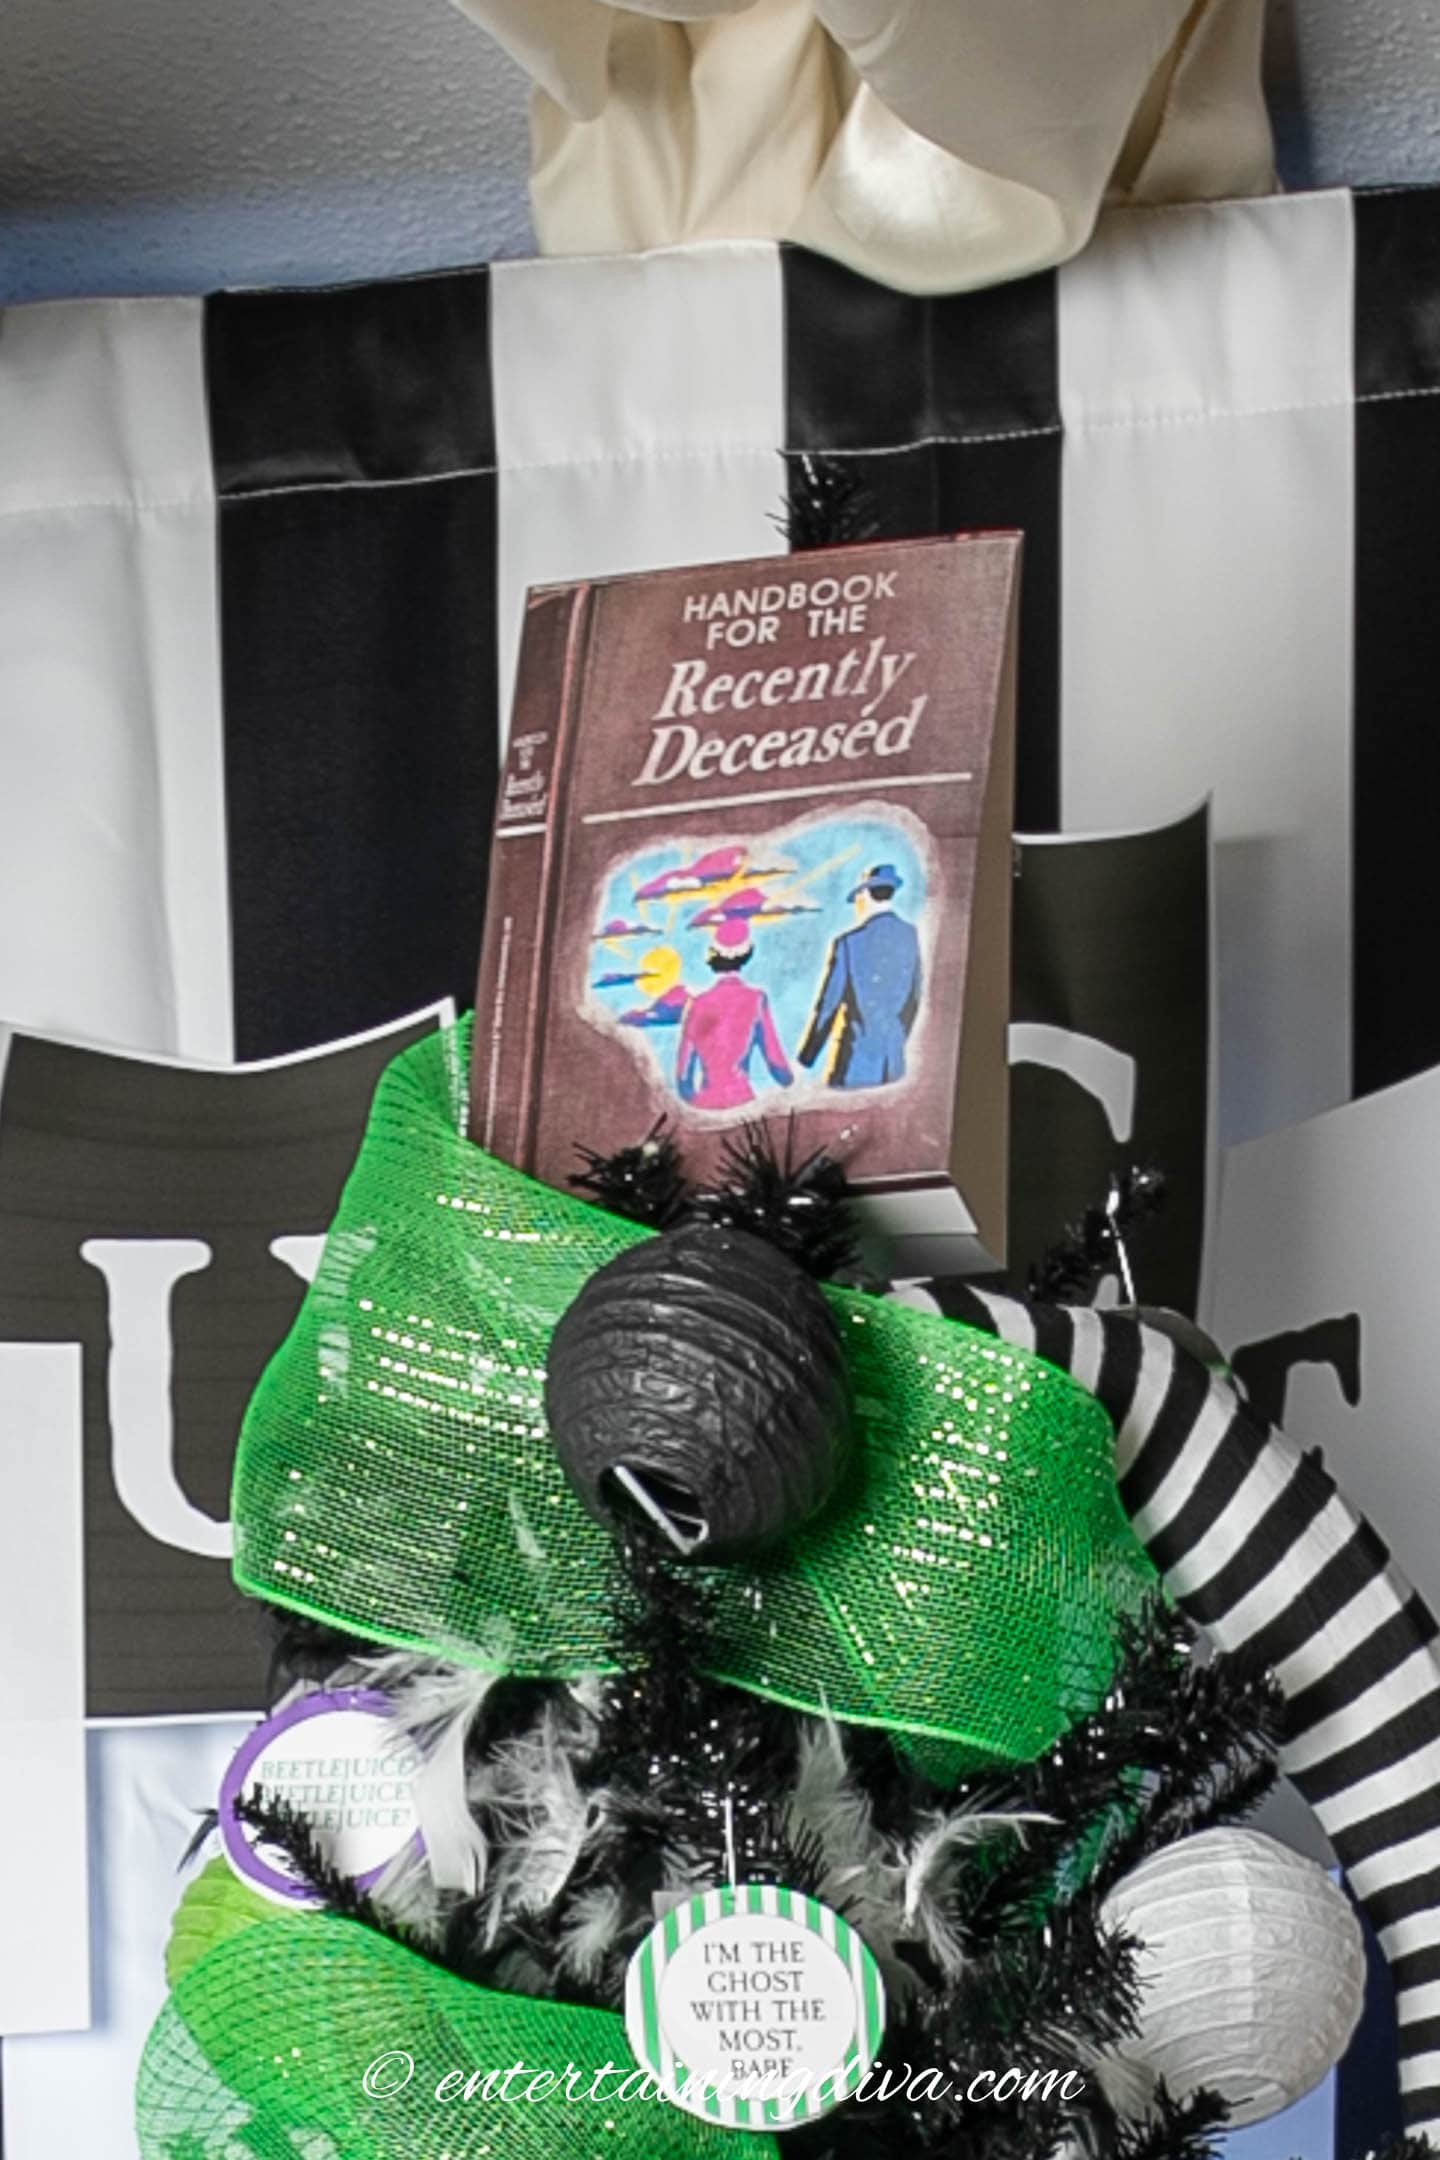 A replica of the "handbook for the recently deceased" used as a tree topper on a Beetlejuice Halloween tree